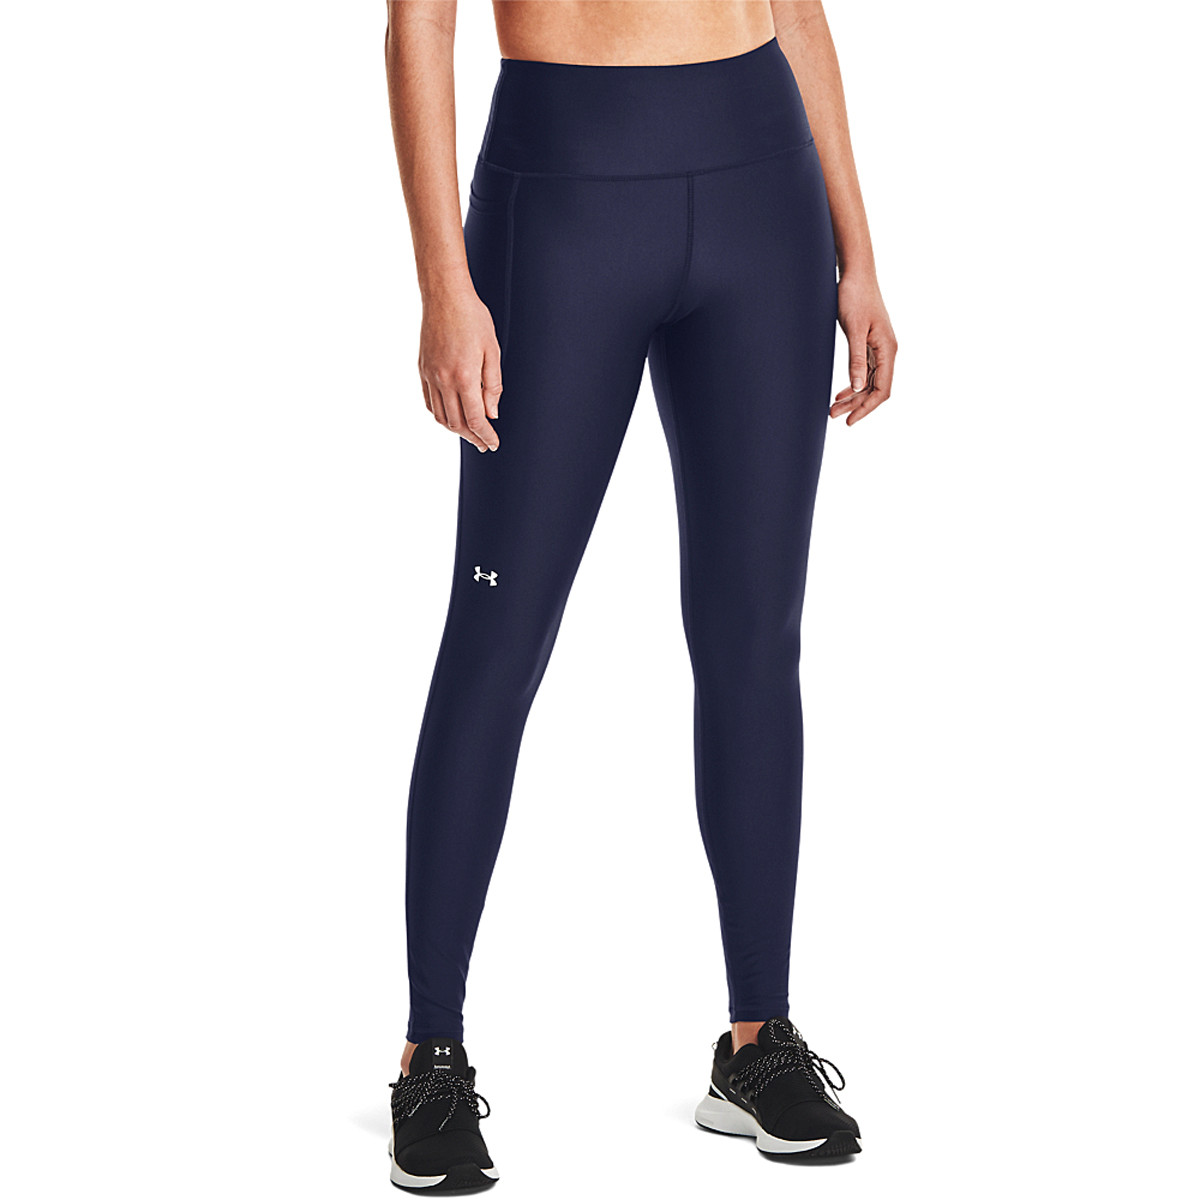 MALLAS UNDER ARMOUR MUJER HEATGEAR HIRISE - UNDER ARMOUR - Mujer - Ropa